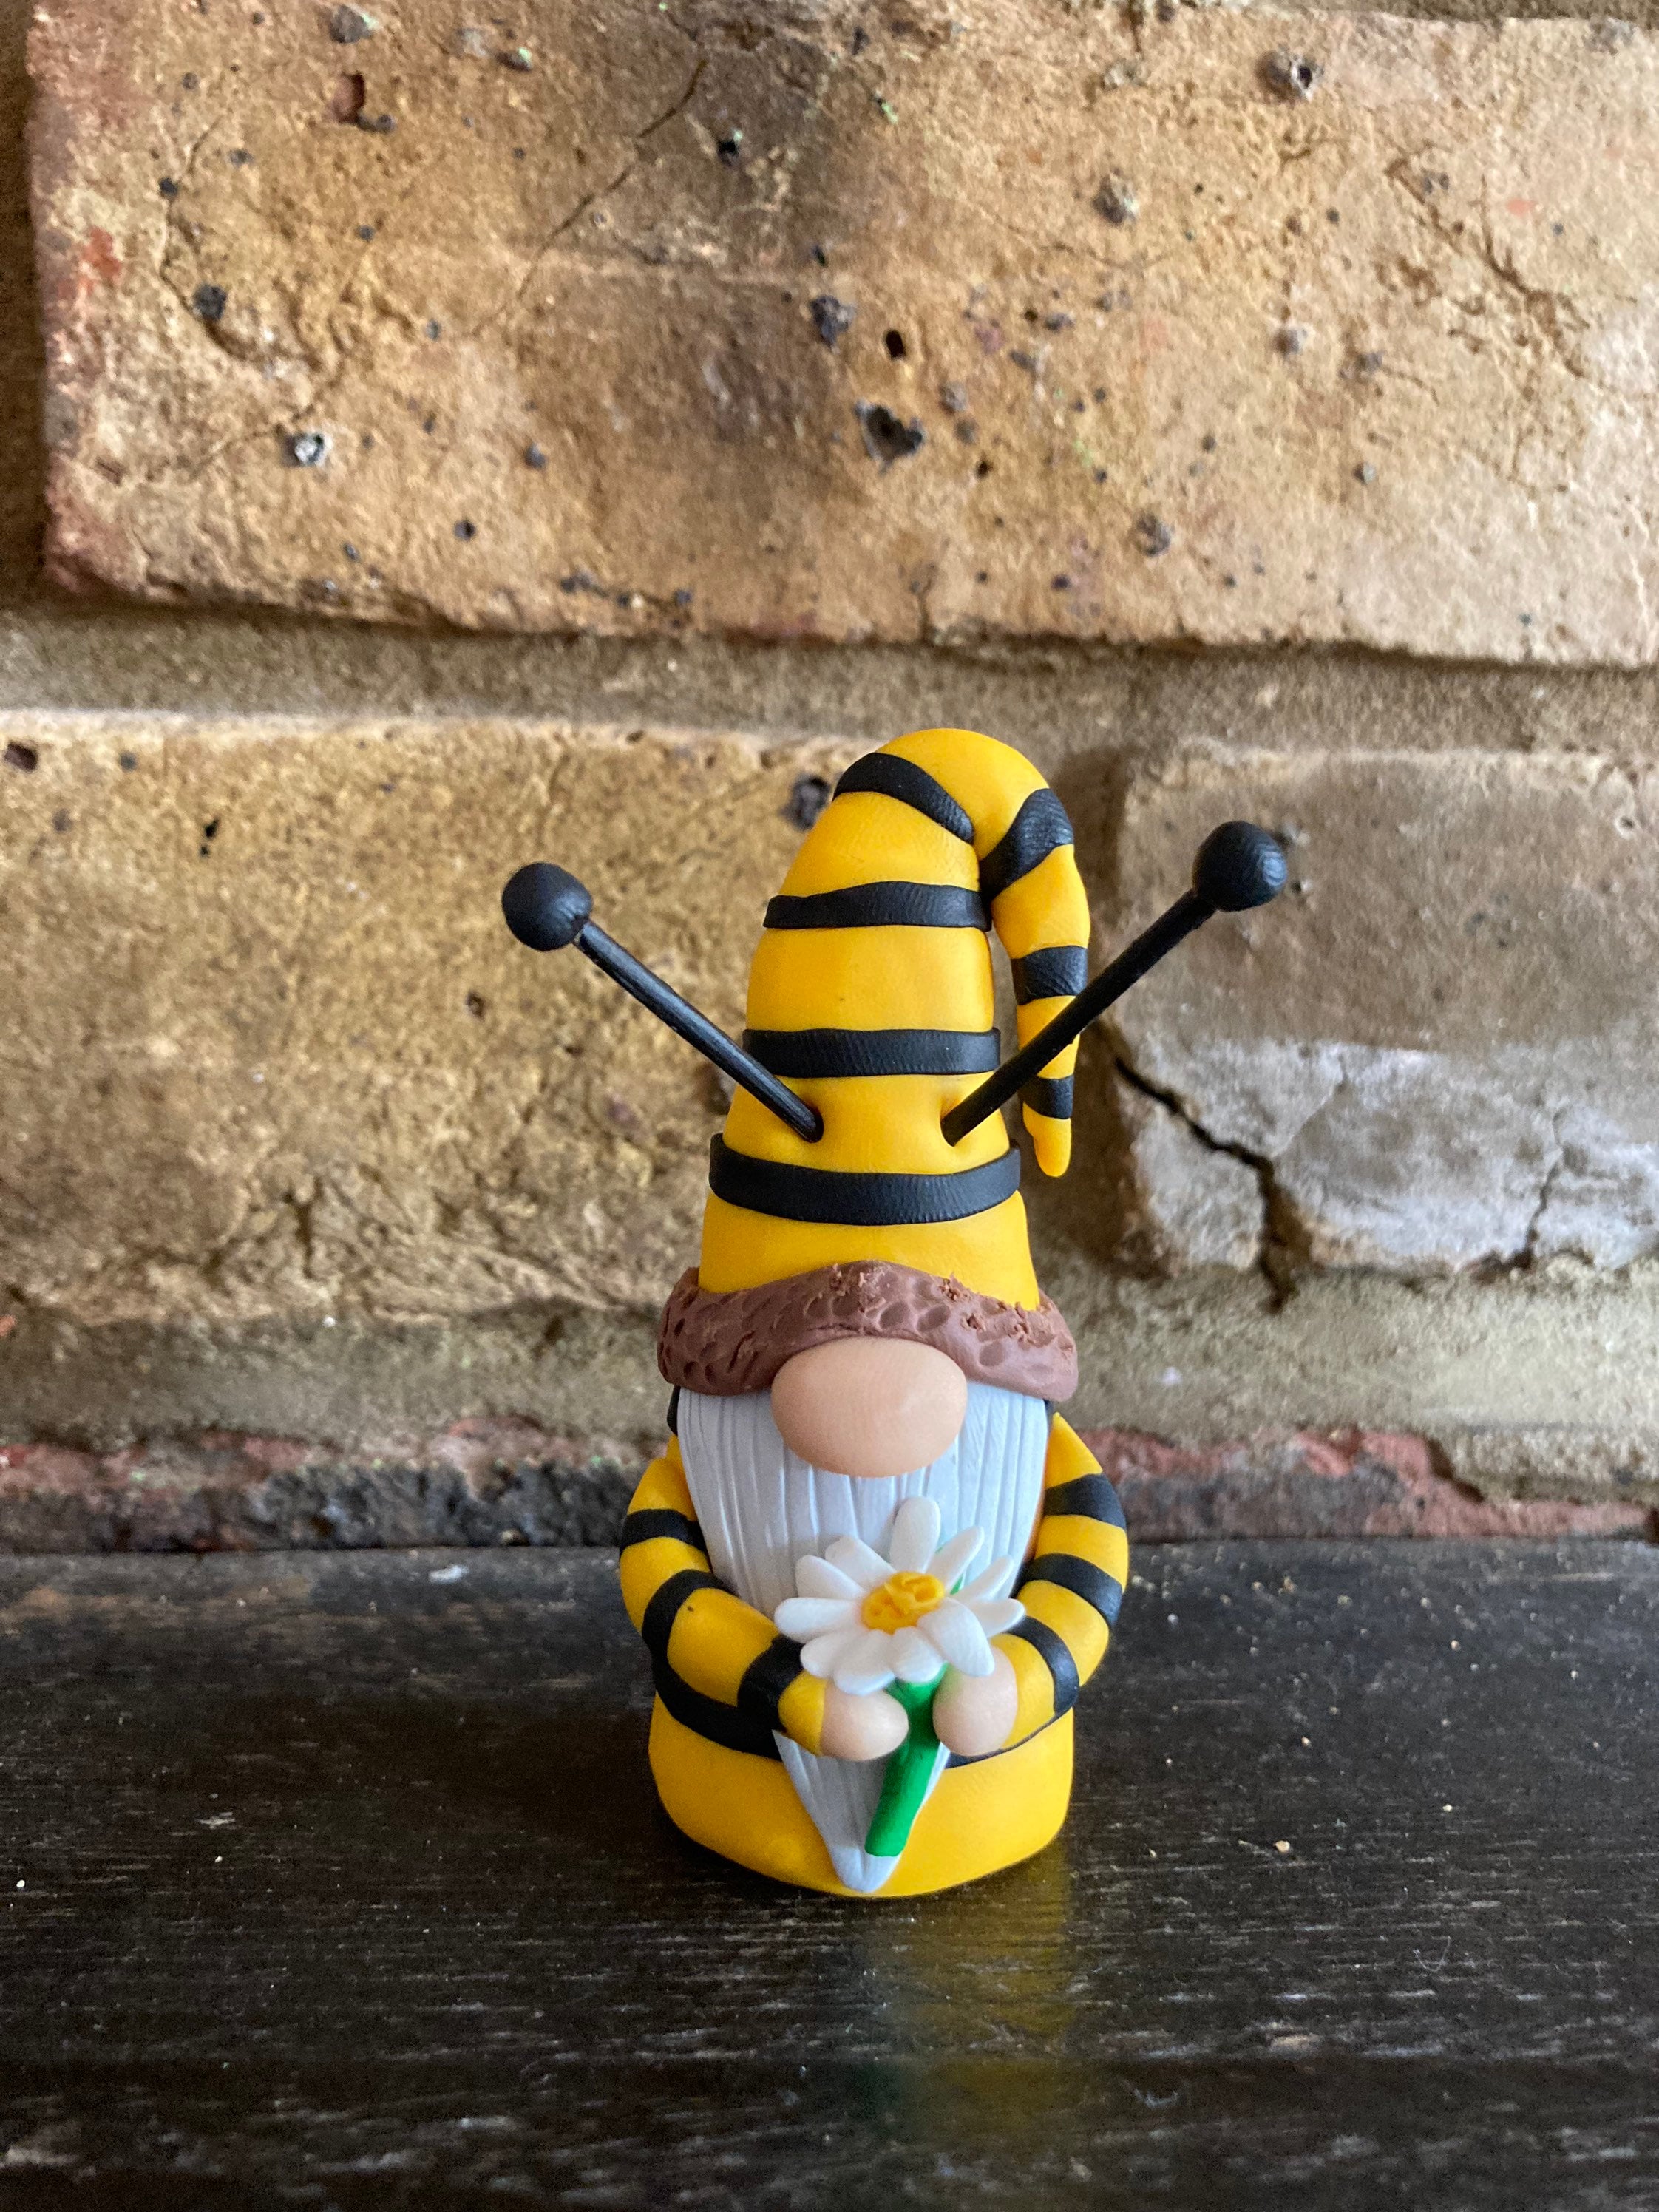  CRCZK Bumble Bee Chef Gnome Scandinavian Tomte Nisse Swedish Honey  Bee Elf Spring Home Farmhouse Kitchen Decor Bee Shelf Tiered Tray  Decorations - World Bee Day Decorations Gifts : Everything Else